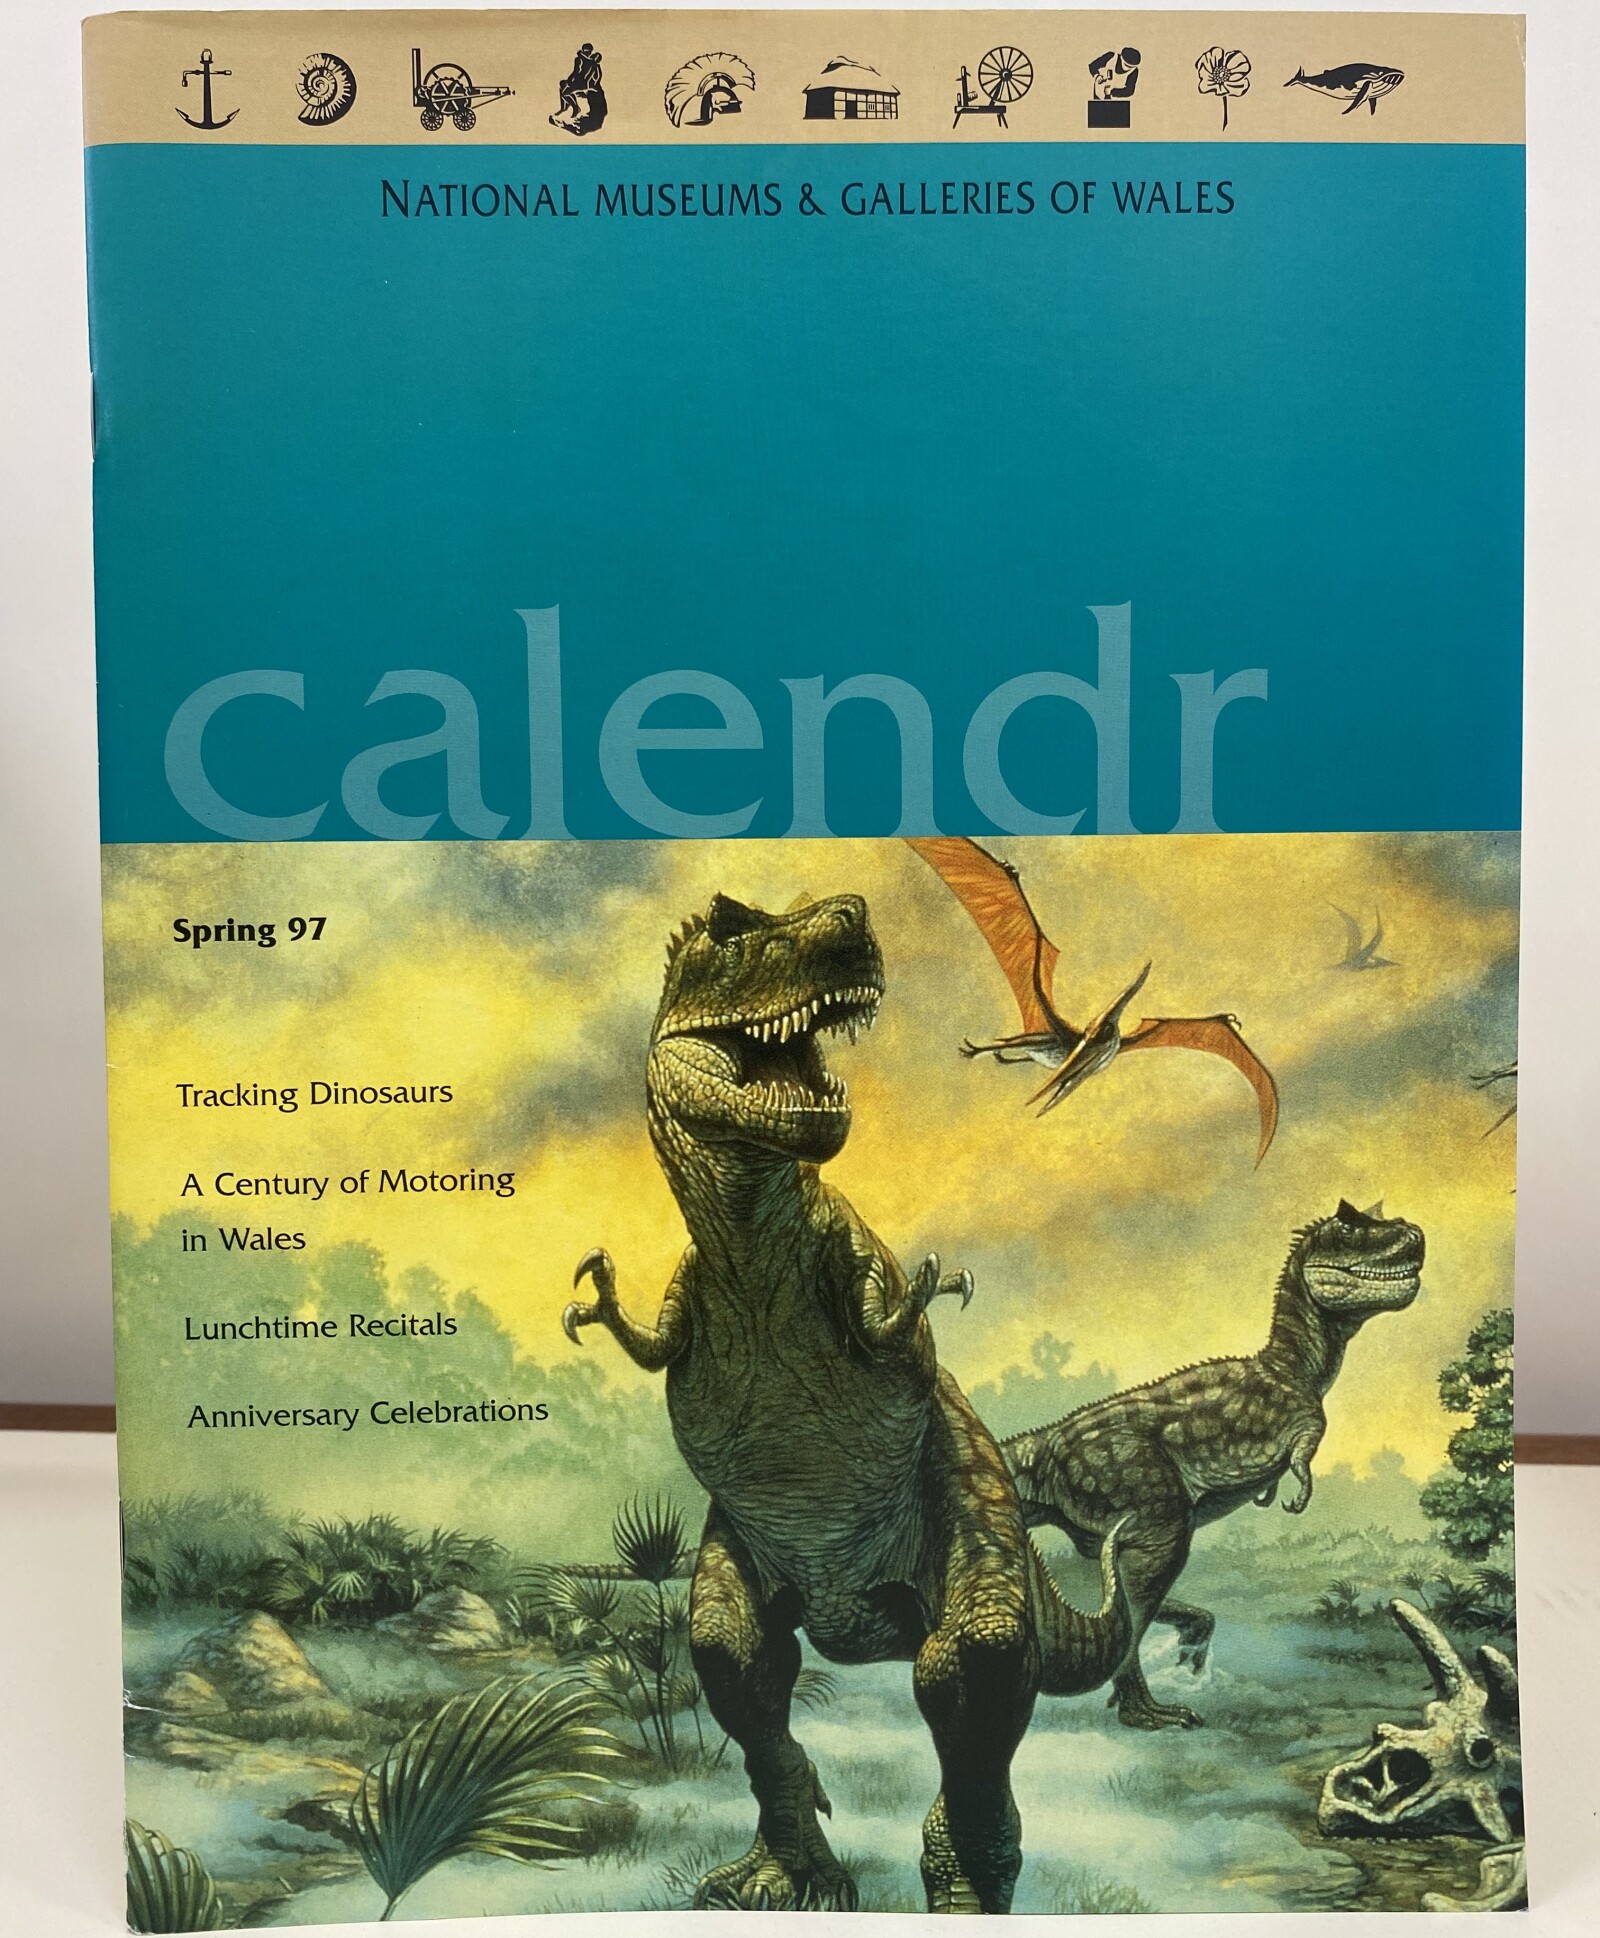 Museum magazine with illustration of dinosaurs. A band of small black icons runs along the top of the magazine 